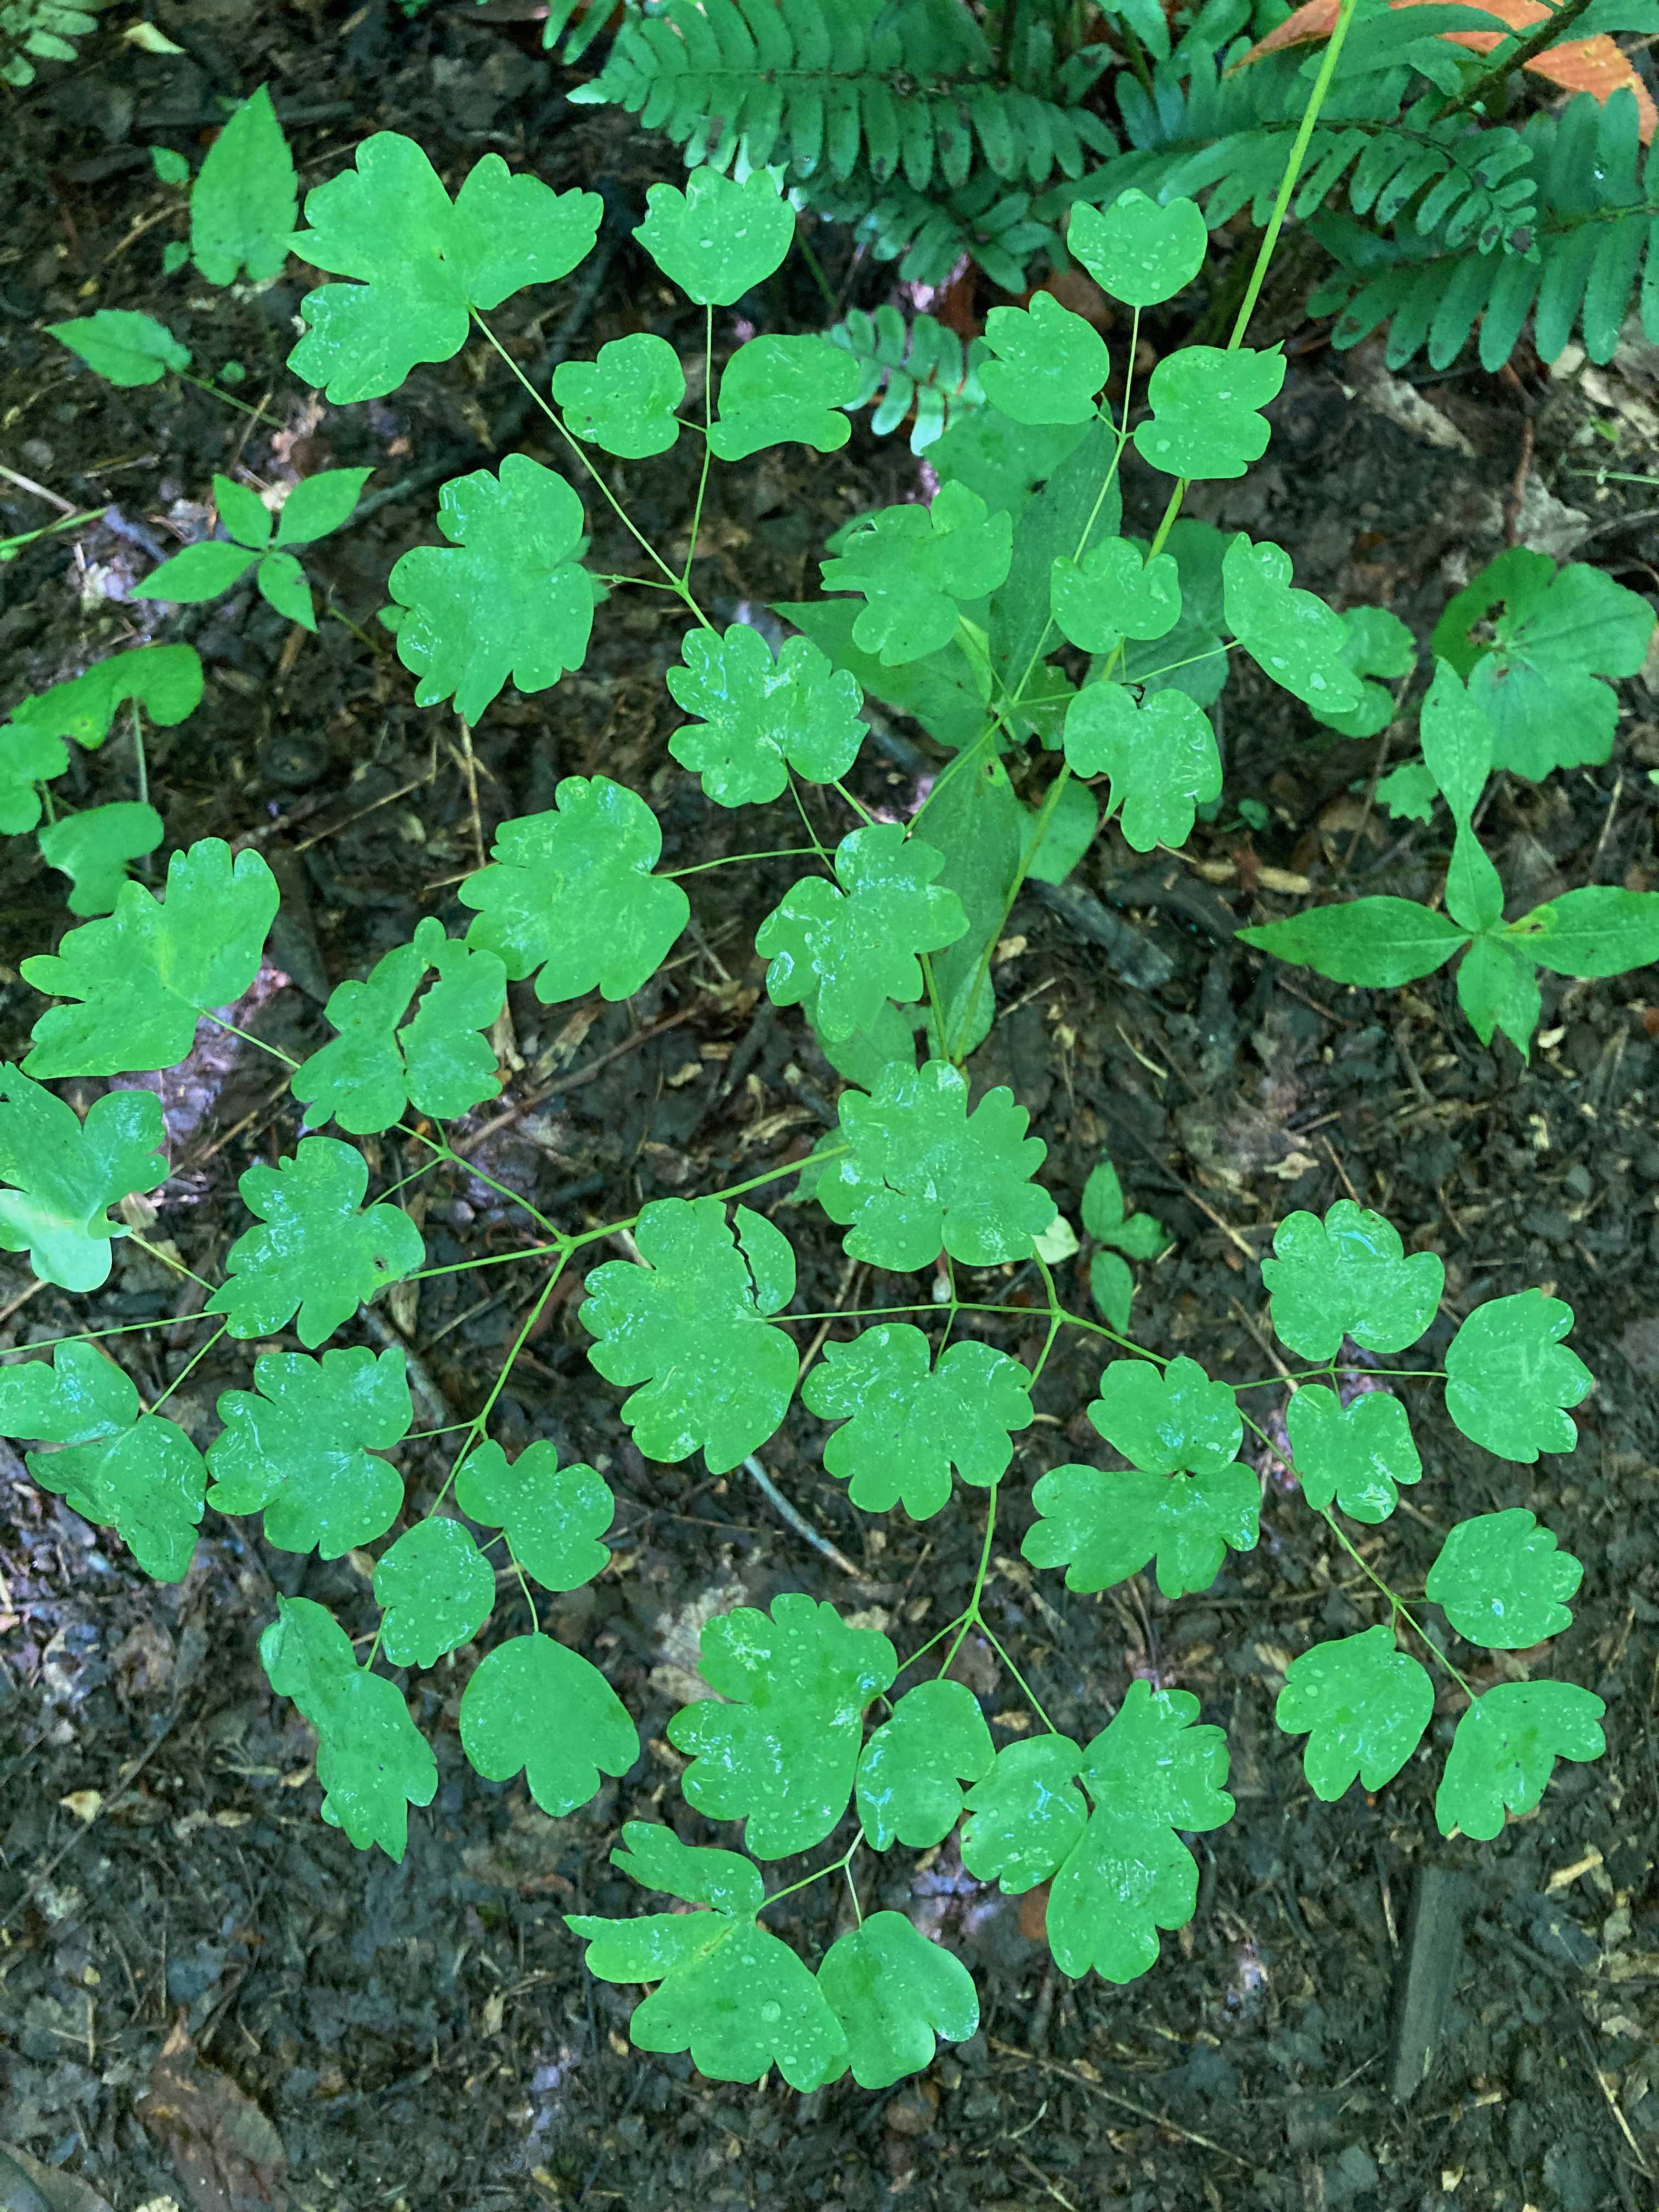 The Scientific Name is Thalictrum dioicum. You will likely hear them called Early Meadowrue, Early Meadow-rue. This picture shows the The compound leaves are doubly-ternately divided -with 3 sets of 3 leaflets per leaf. of Thalictrum dioicum